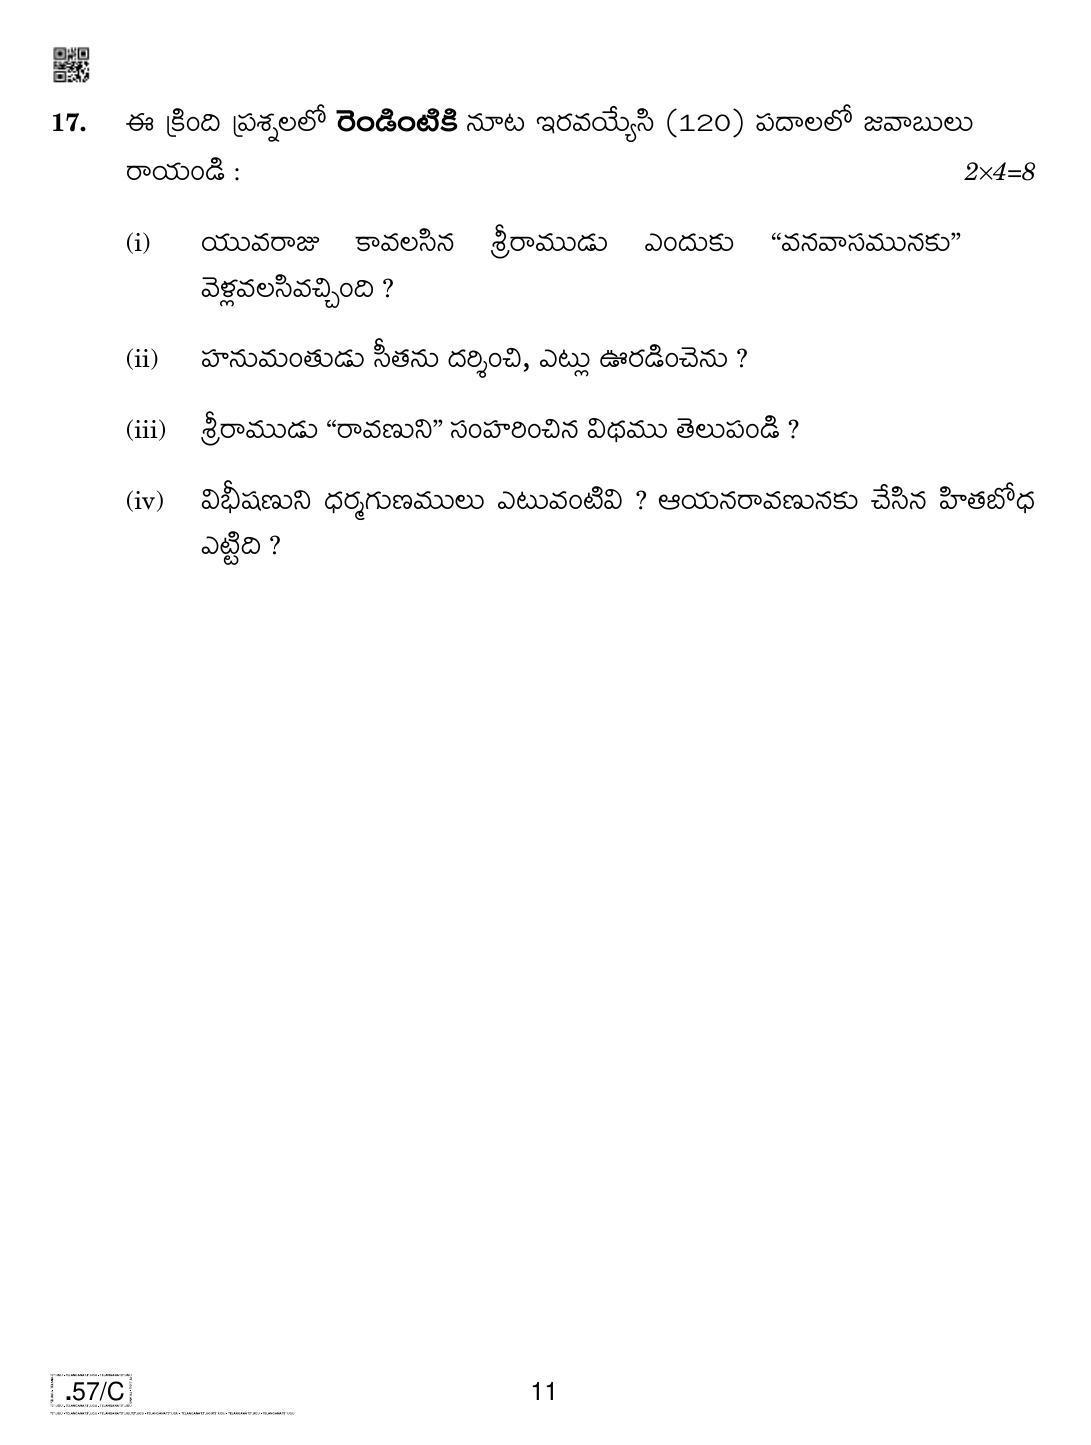 CBSE Class 10 Telug Telangana 2020 Compartment Question Paper - Page 11